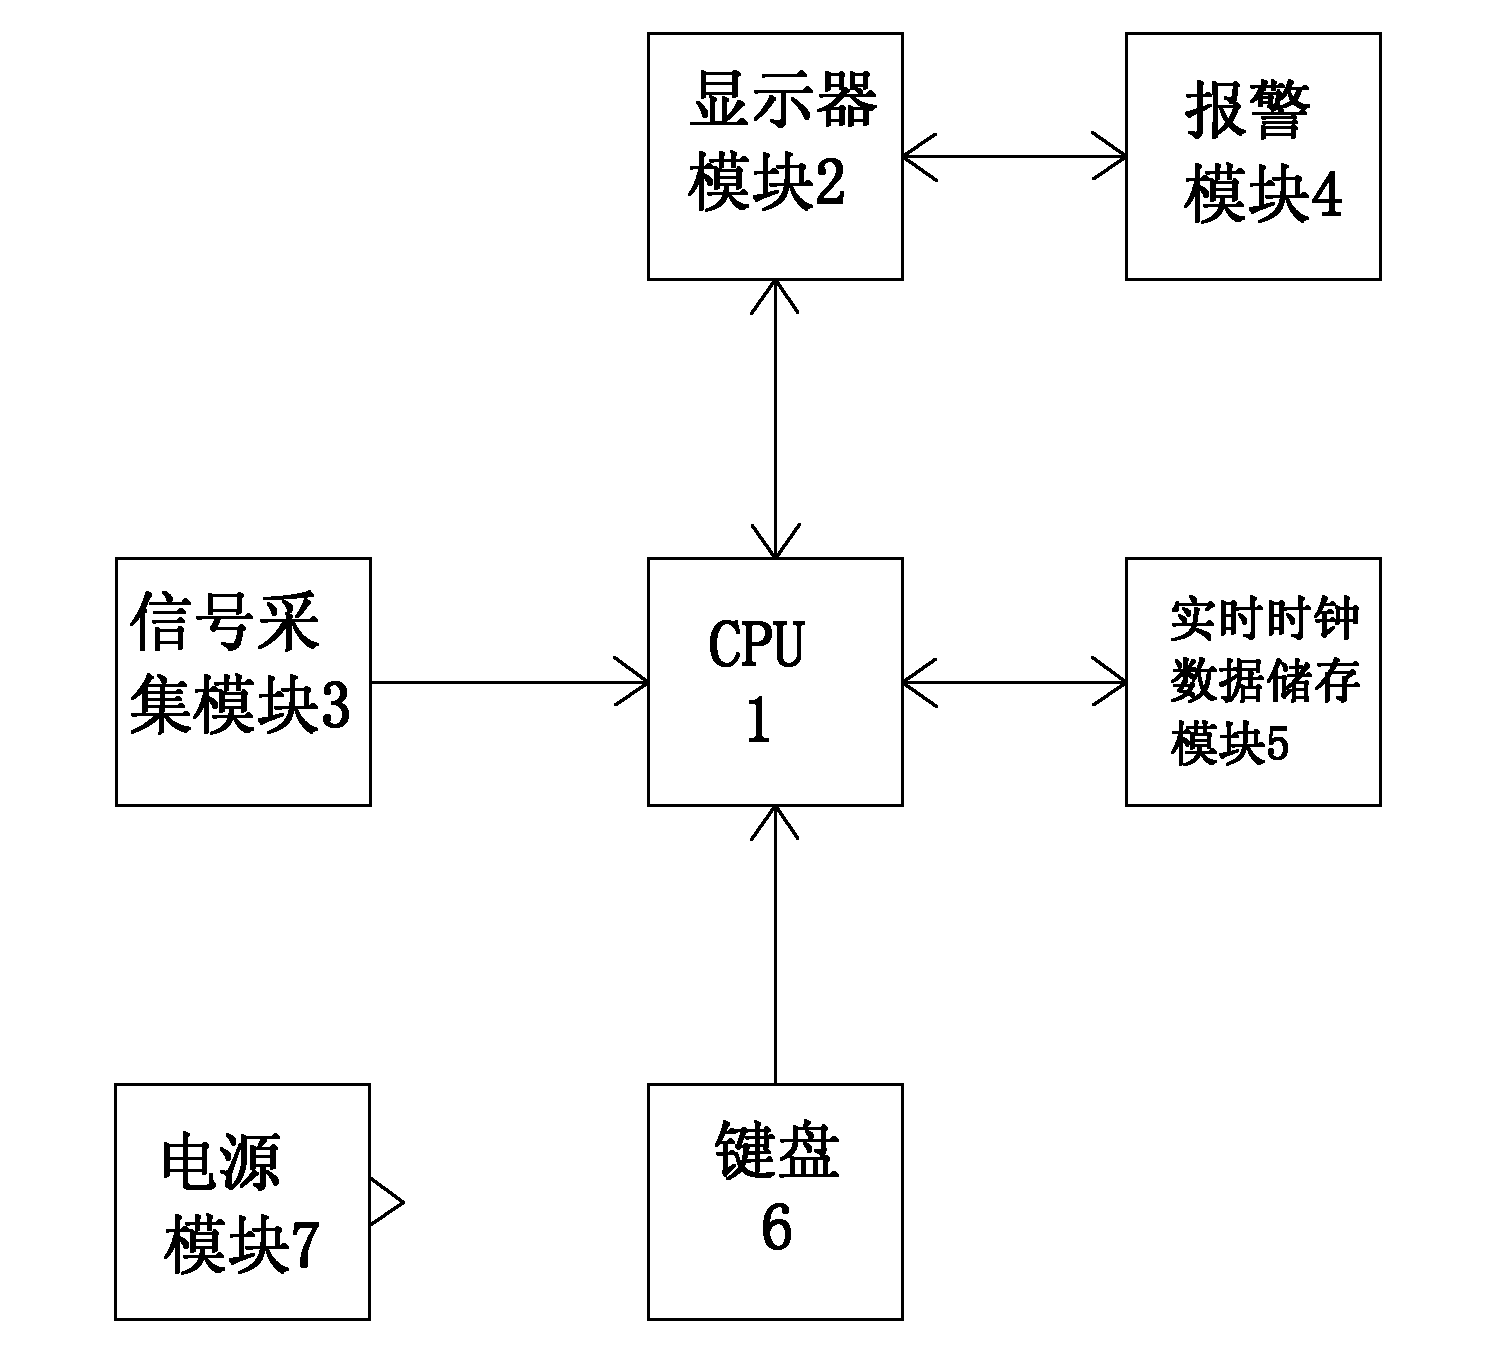 Digital electronic counting information processing method